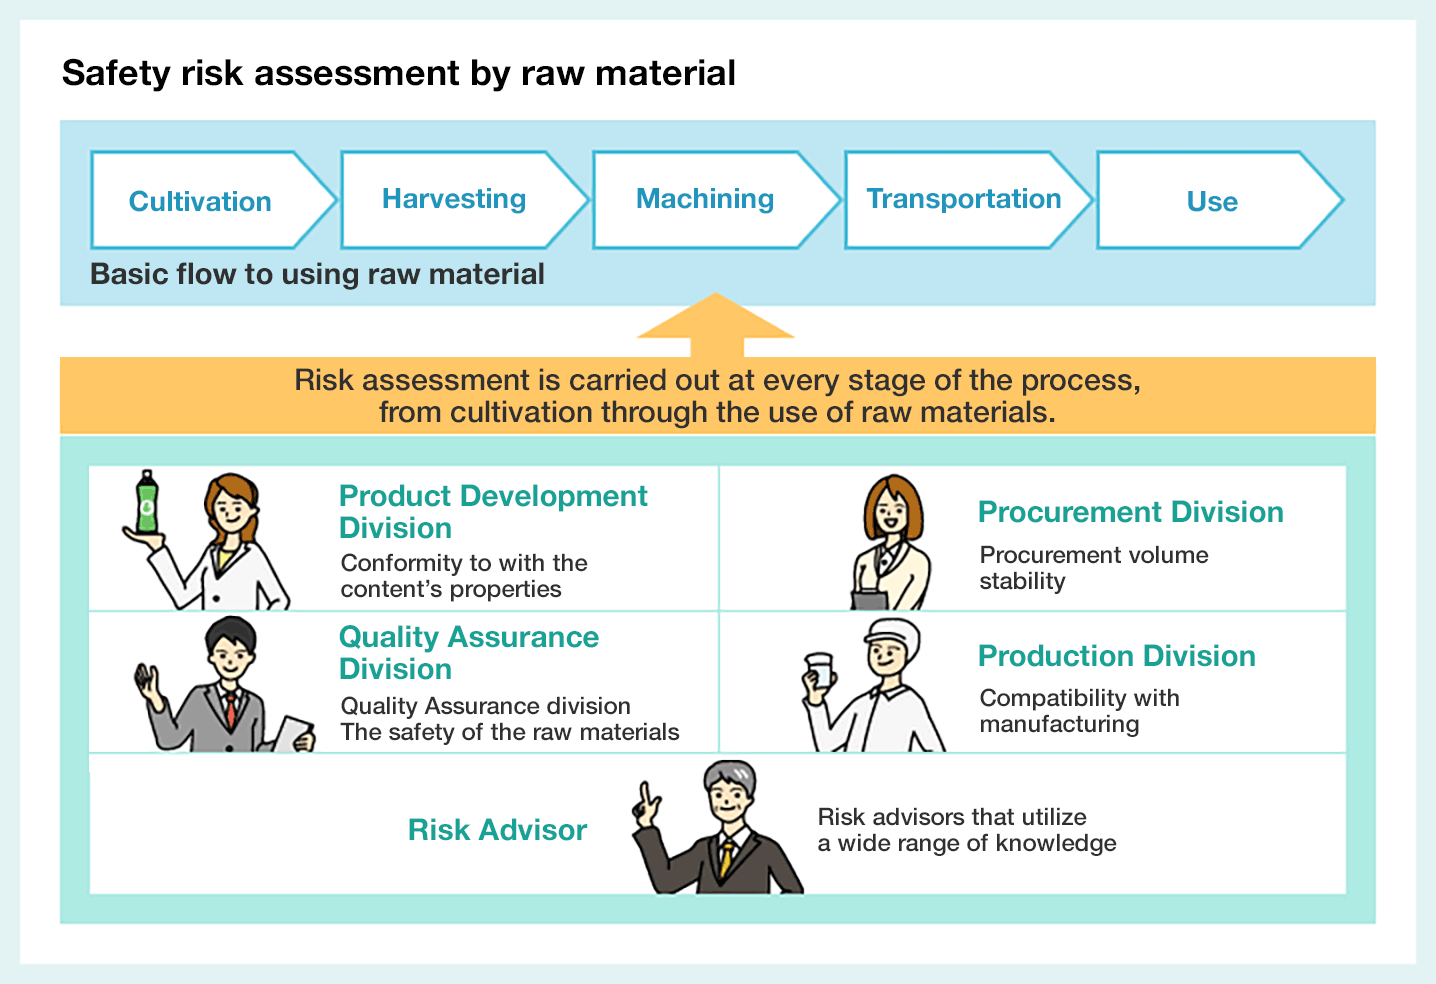 Diagram of safety risk assessment by raw material